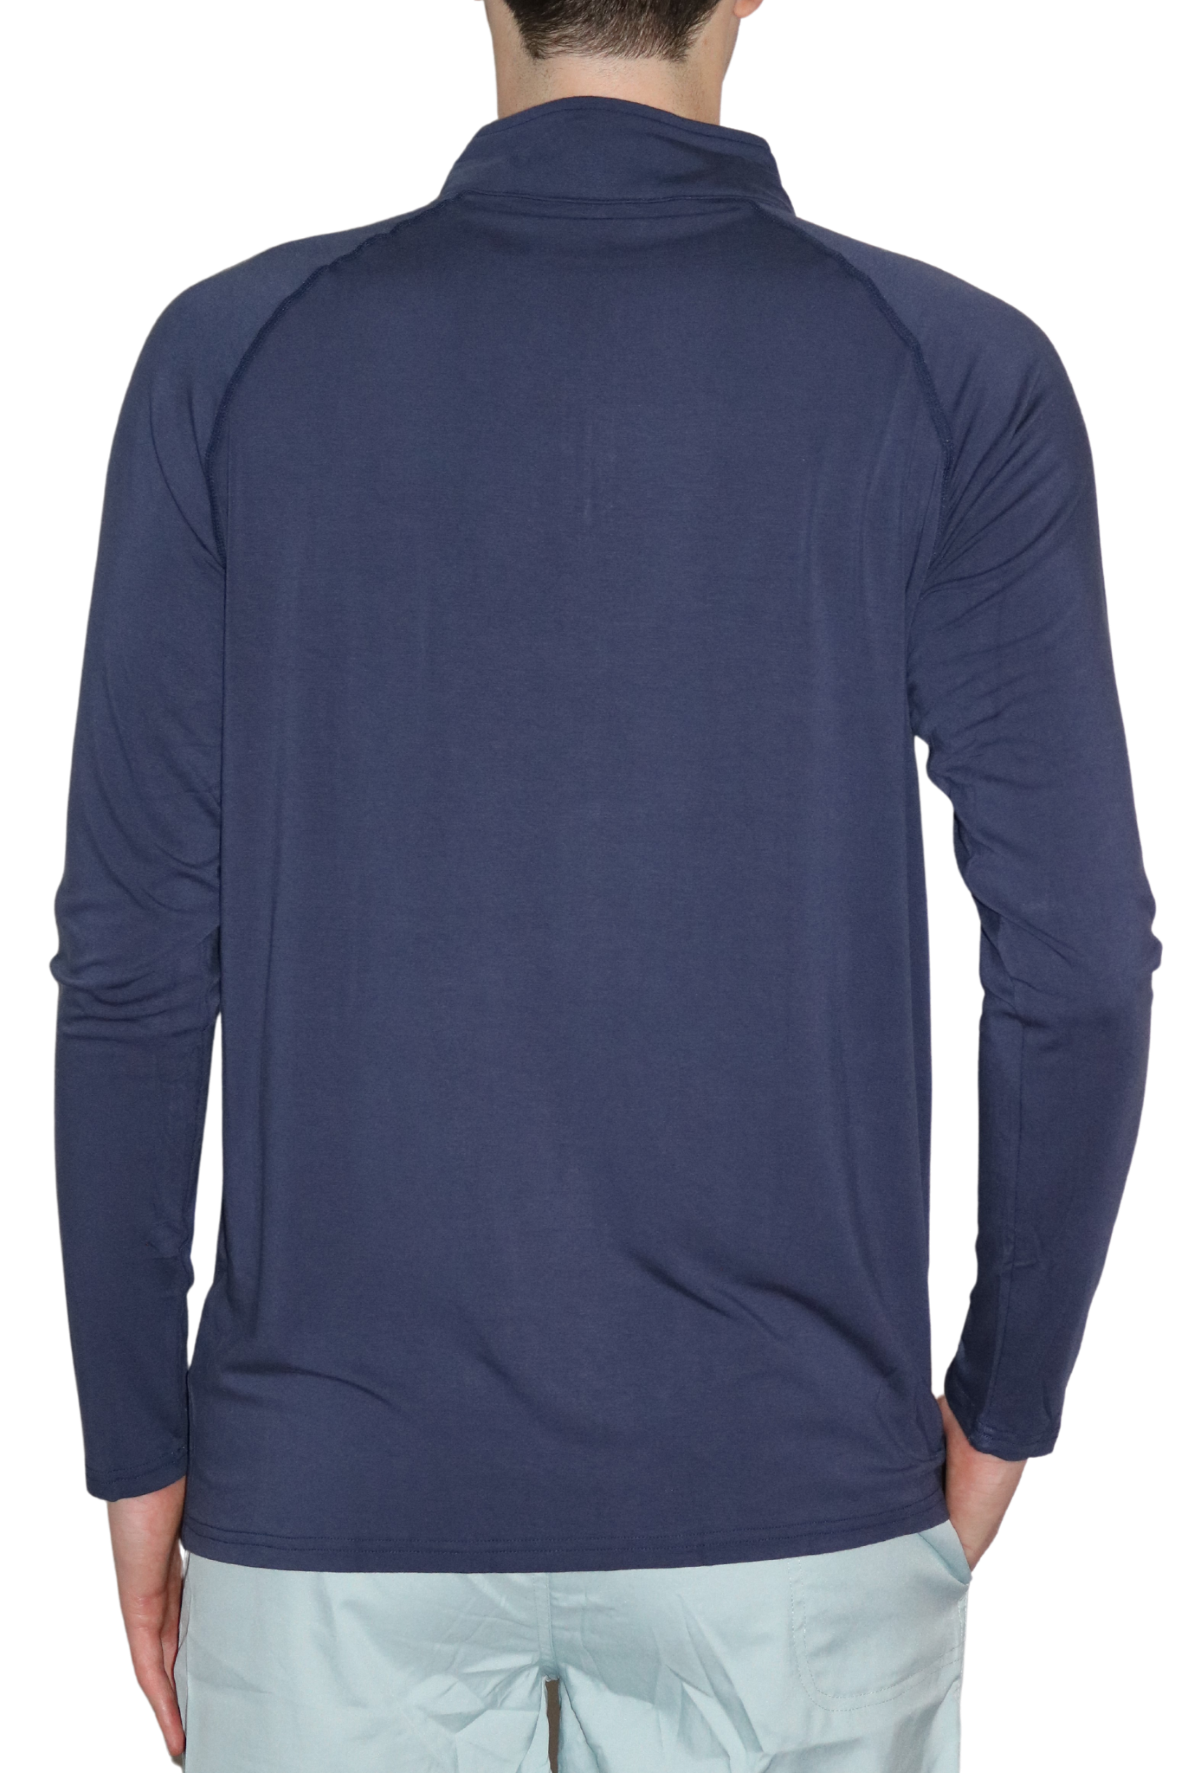 Back of the Captain's Bamboo quarter zip in navy.